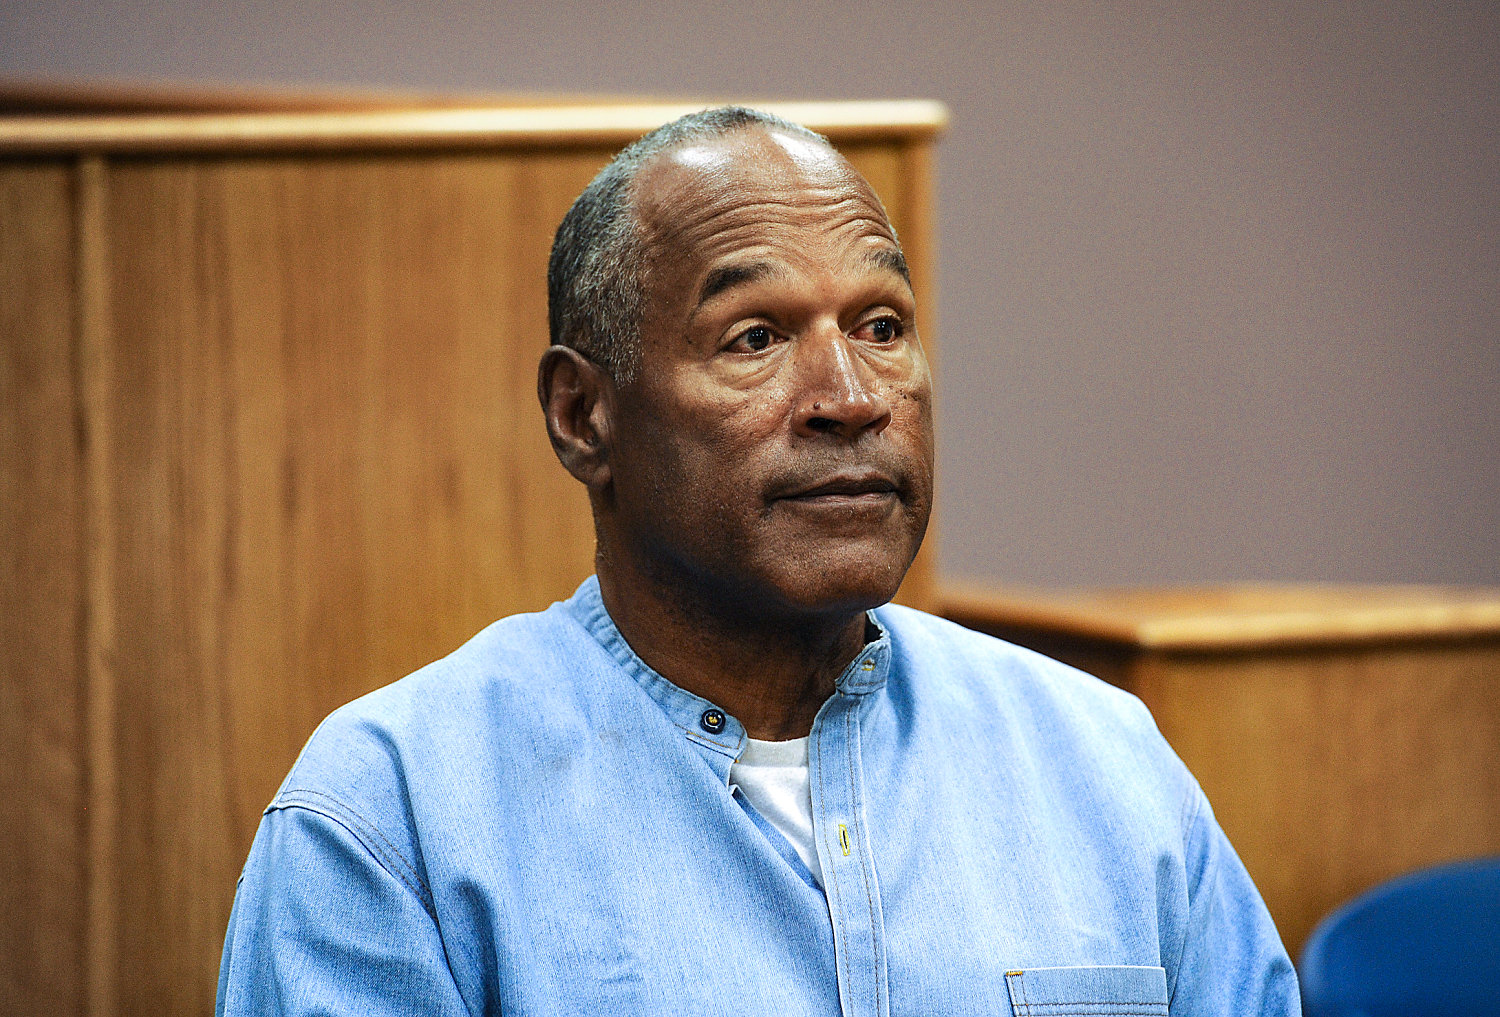 O.J. Simpson was chilling with a beer on a couch two weeks before he died, lawyer says